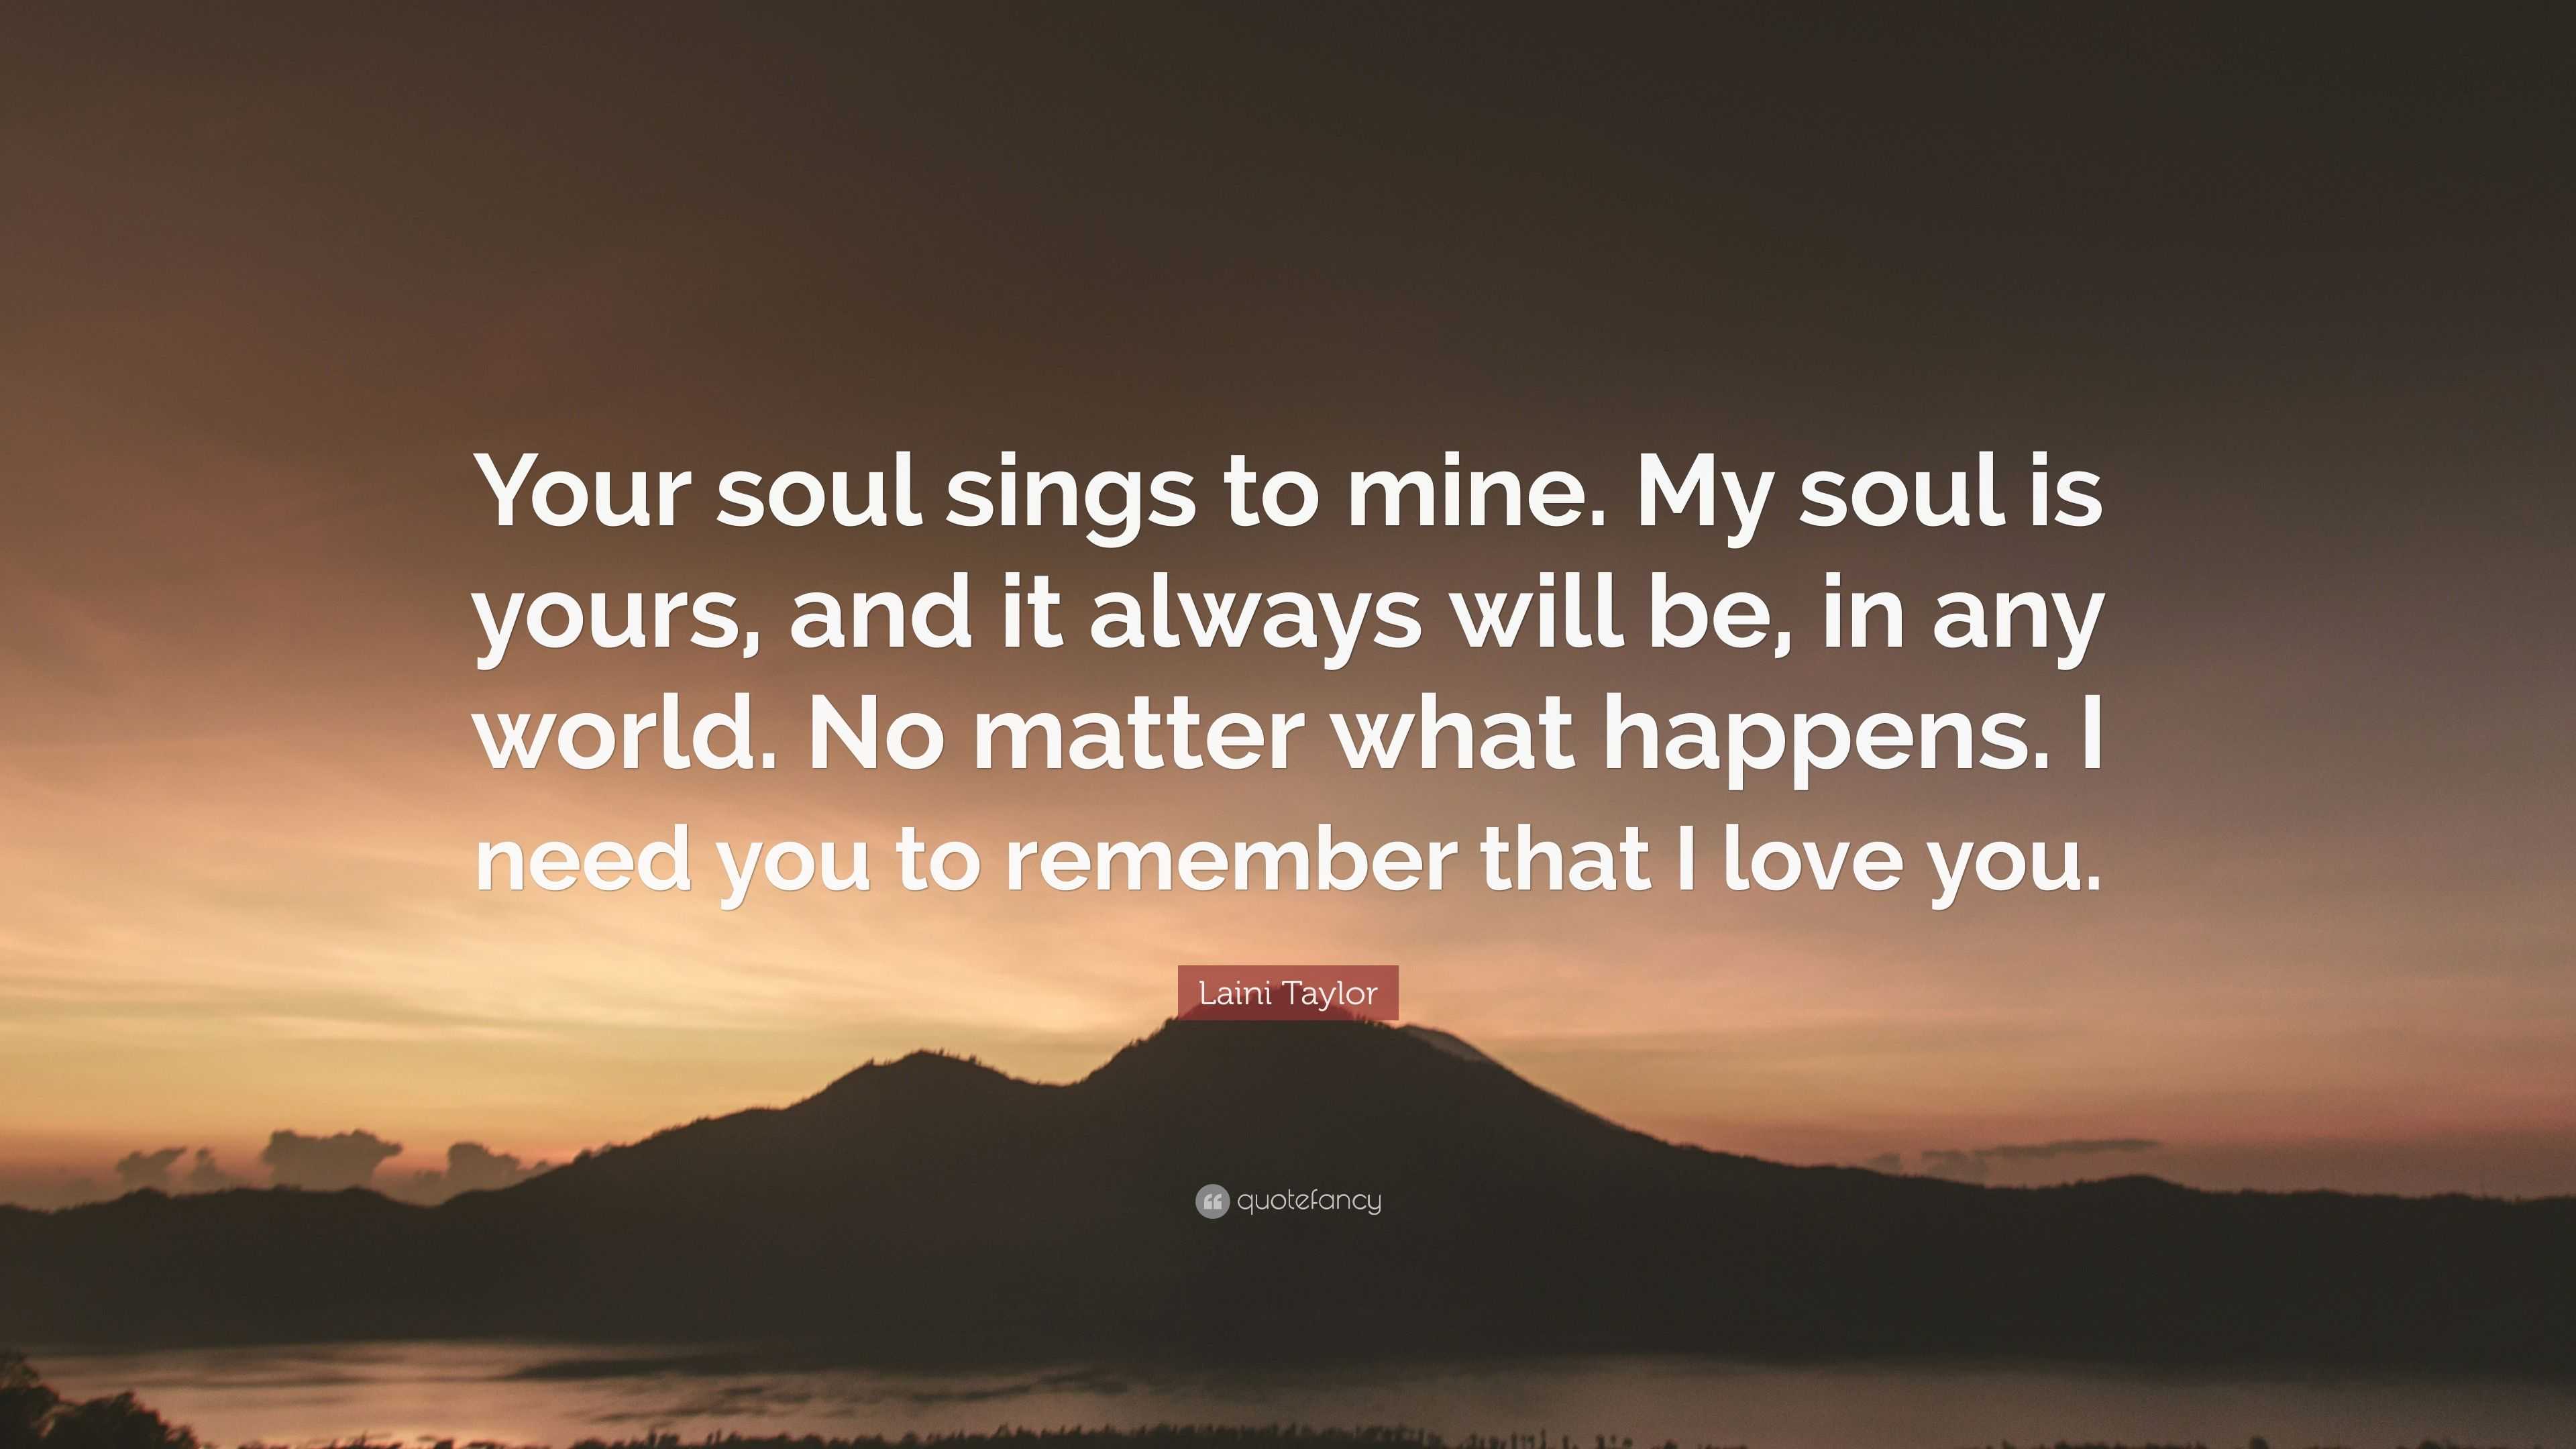 Laini Taylor Quote “Your soul sings to mine My soul is yours